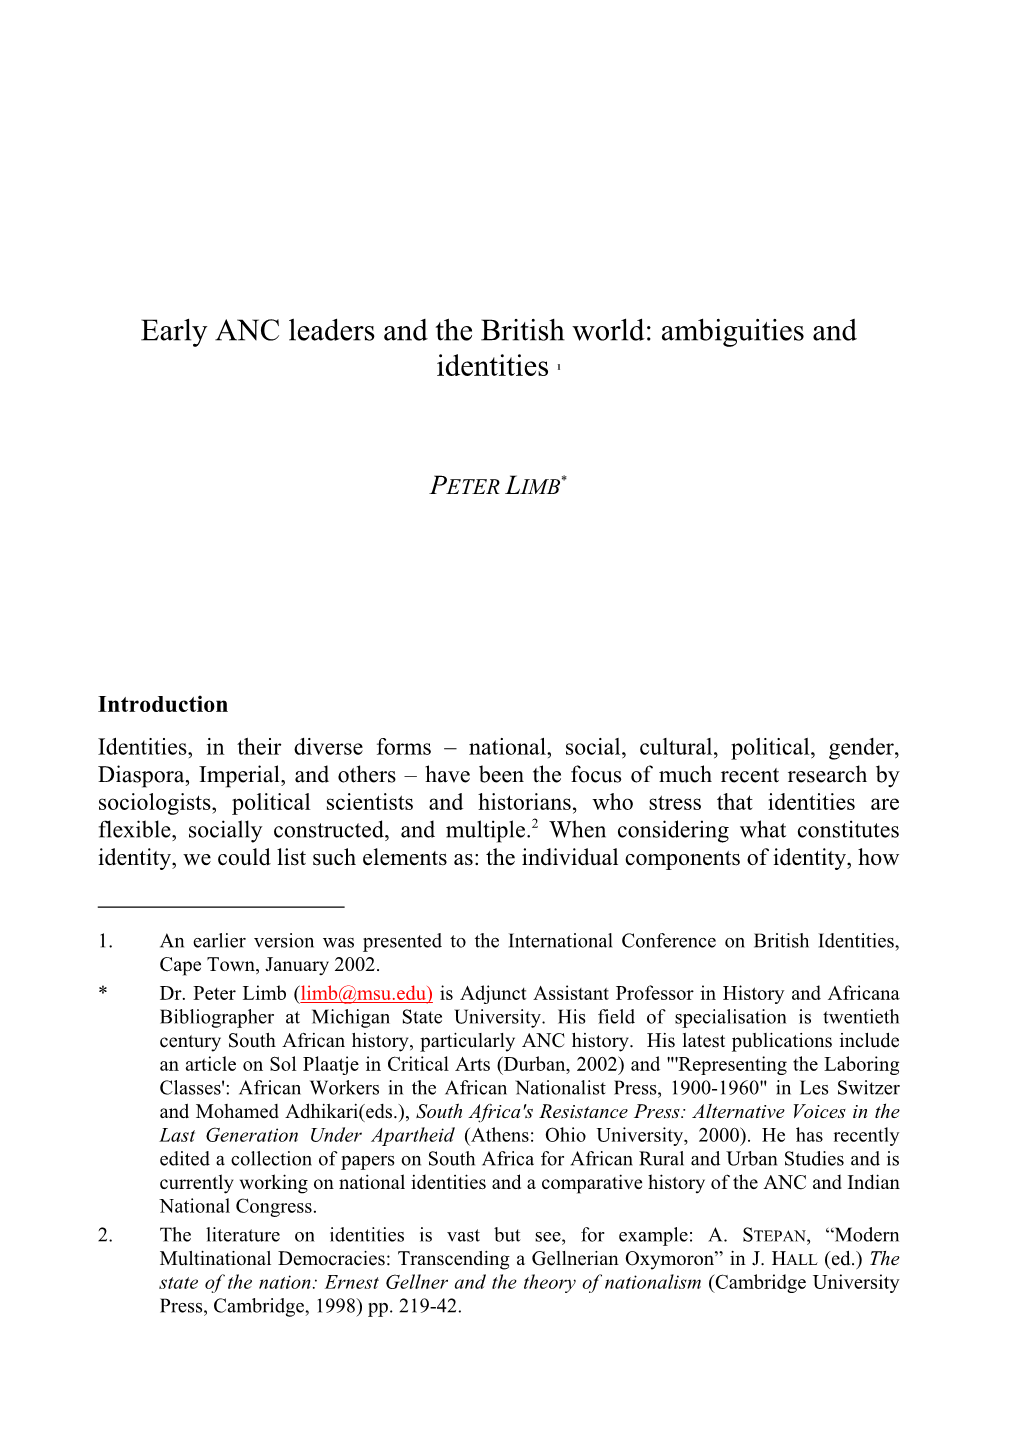 Early ANC Leaders and the British World: Ambiguities and Identities 1